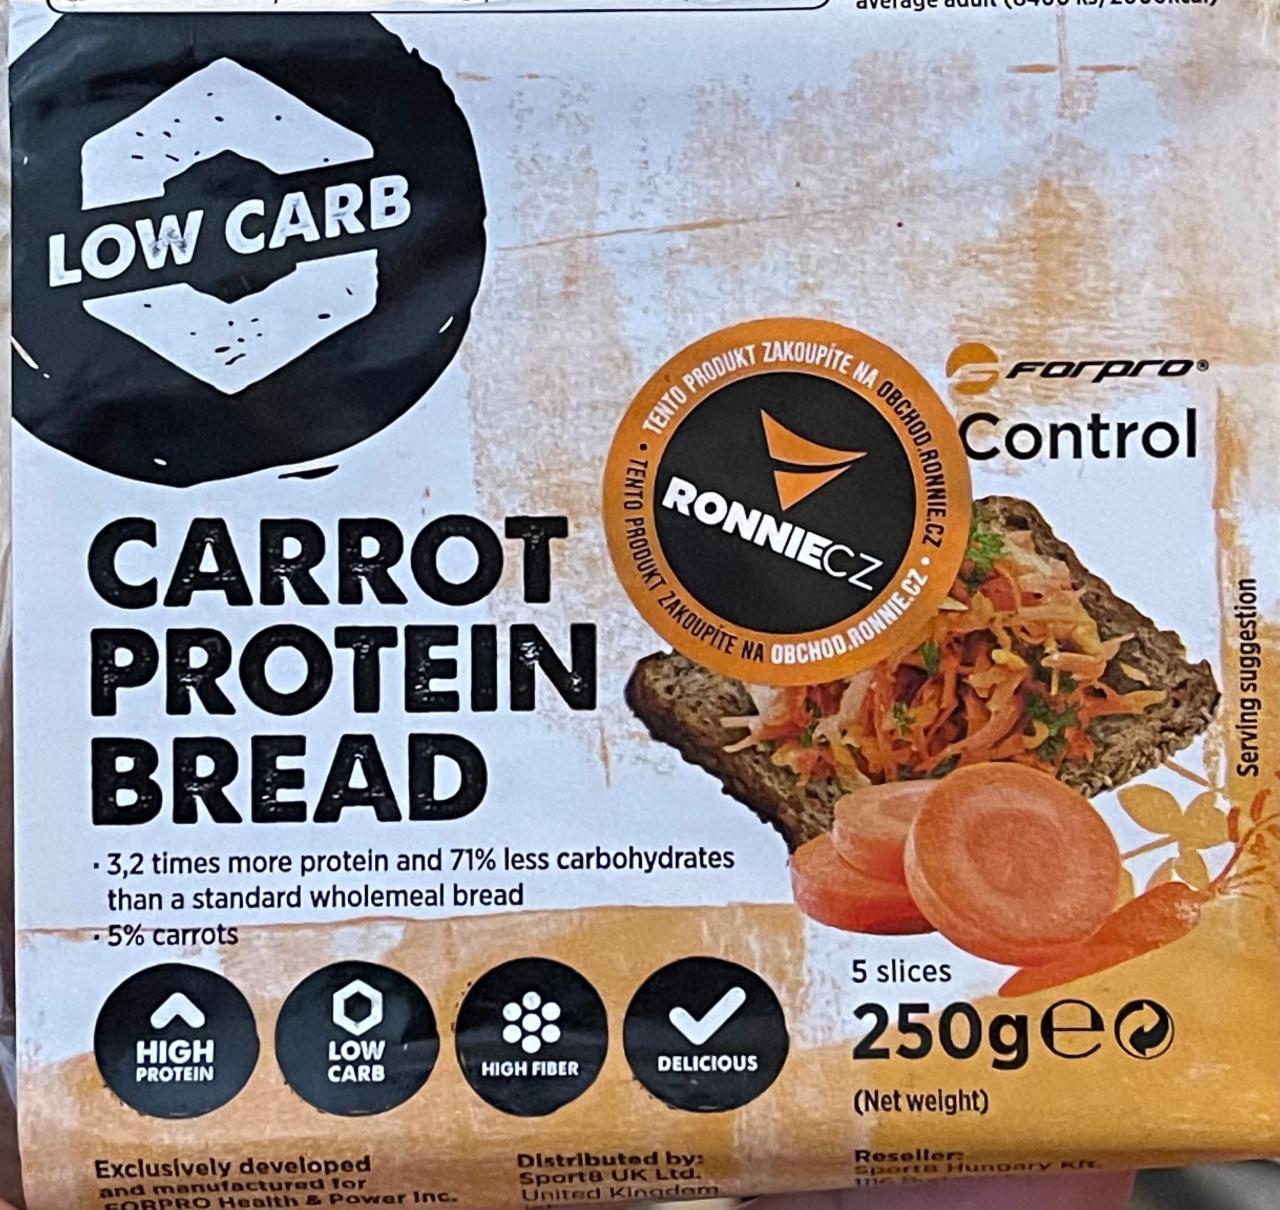 Fotografie - Low Carb Carrot Protein Bread Forpro